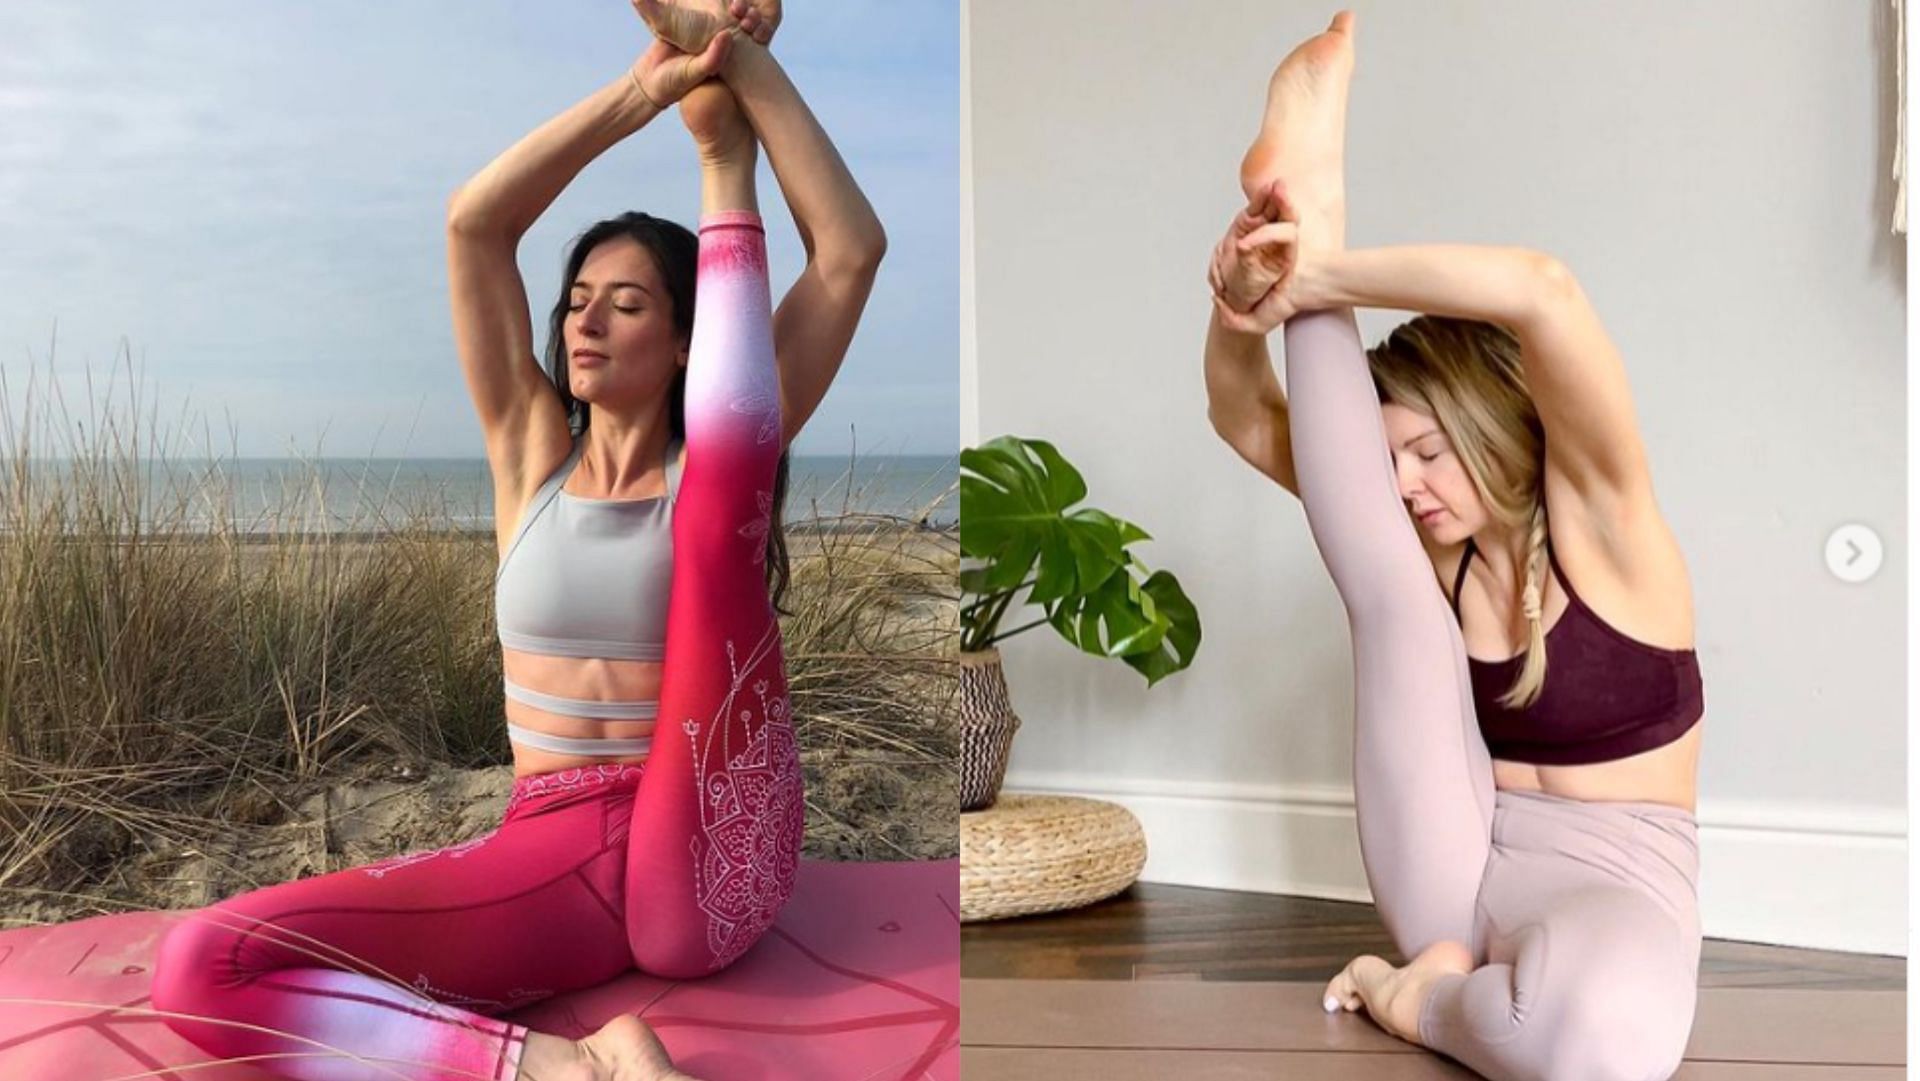 Heron pose is also known as Krounchasana and practicing it regularly provides many health advantages. (Image via Instagram)